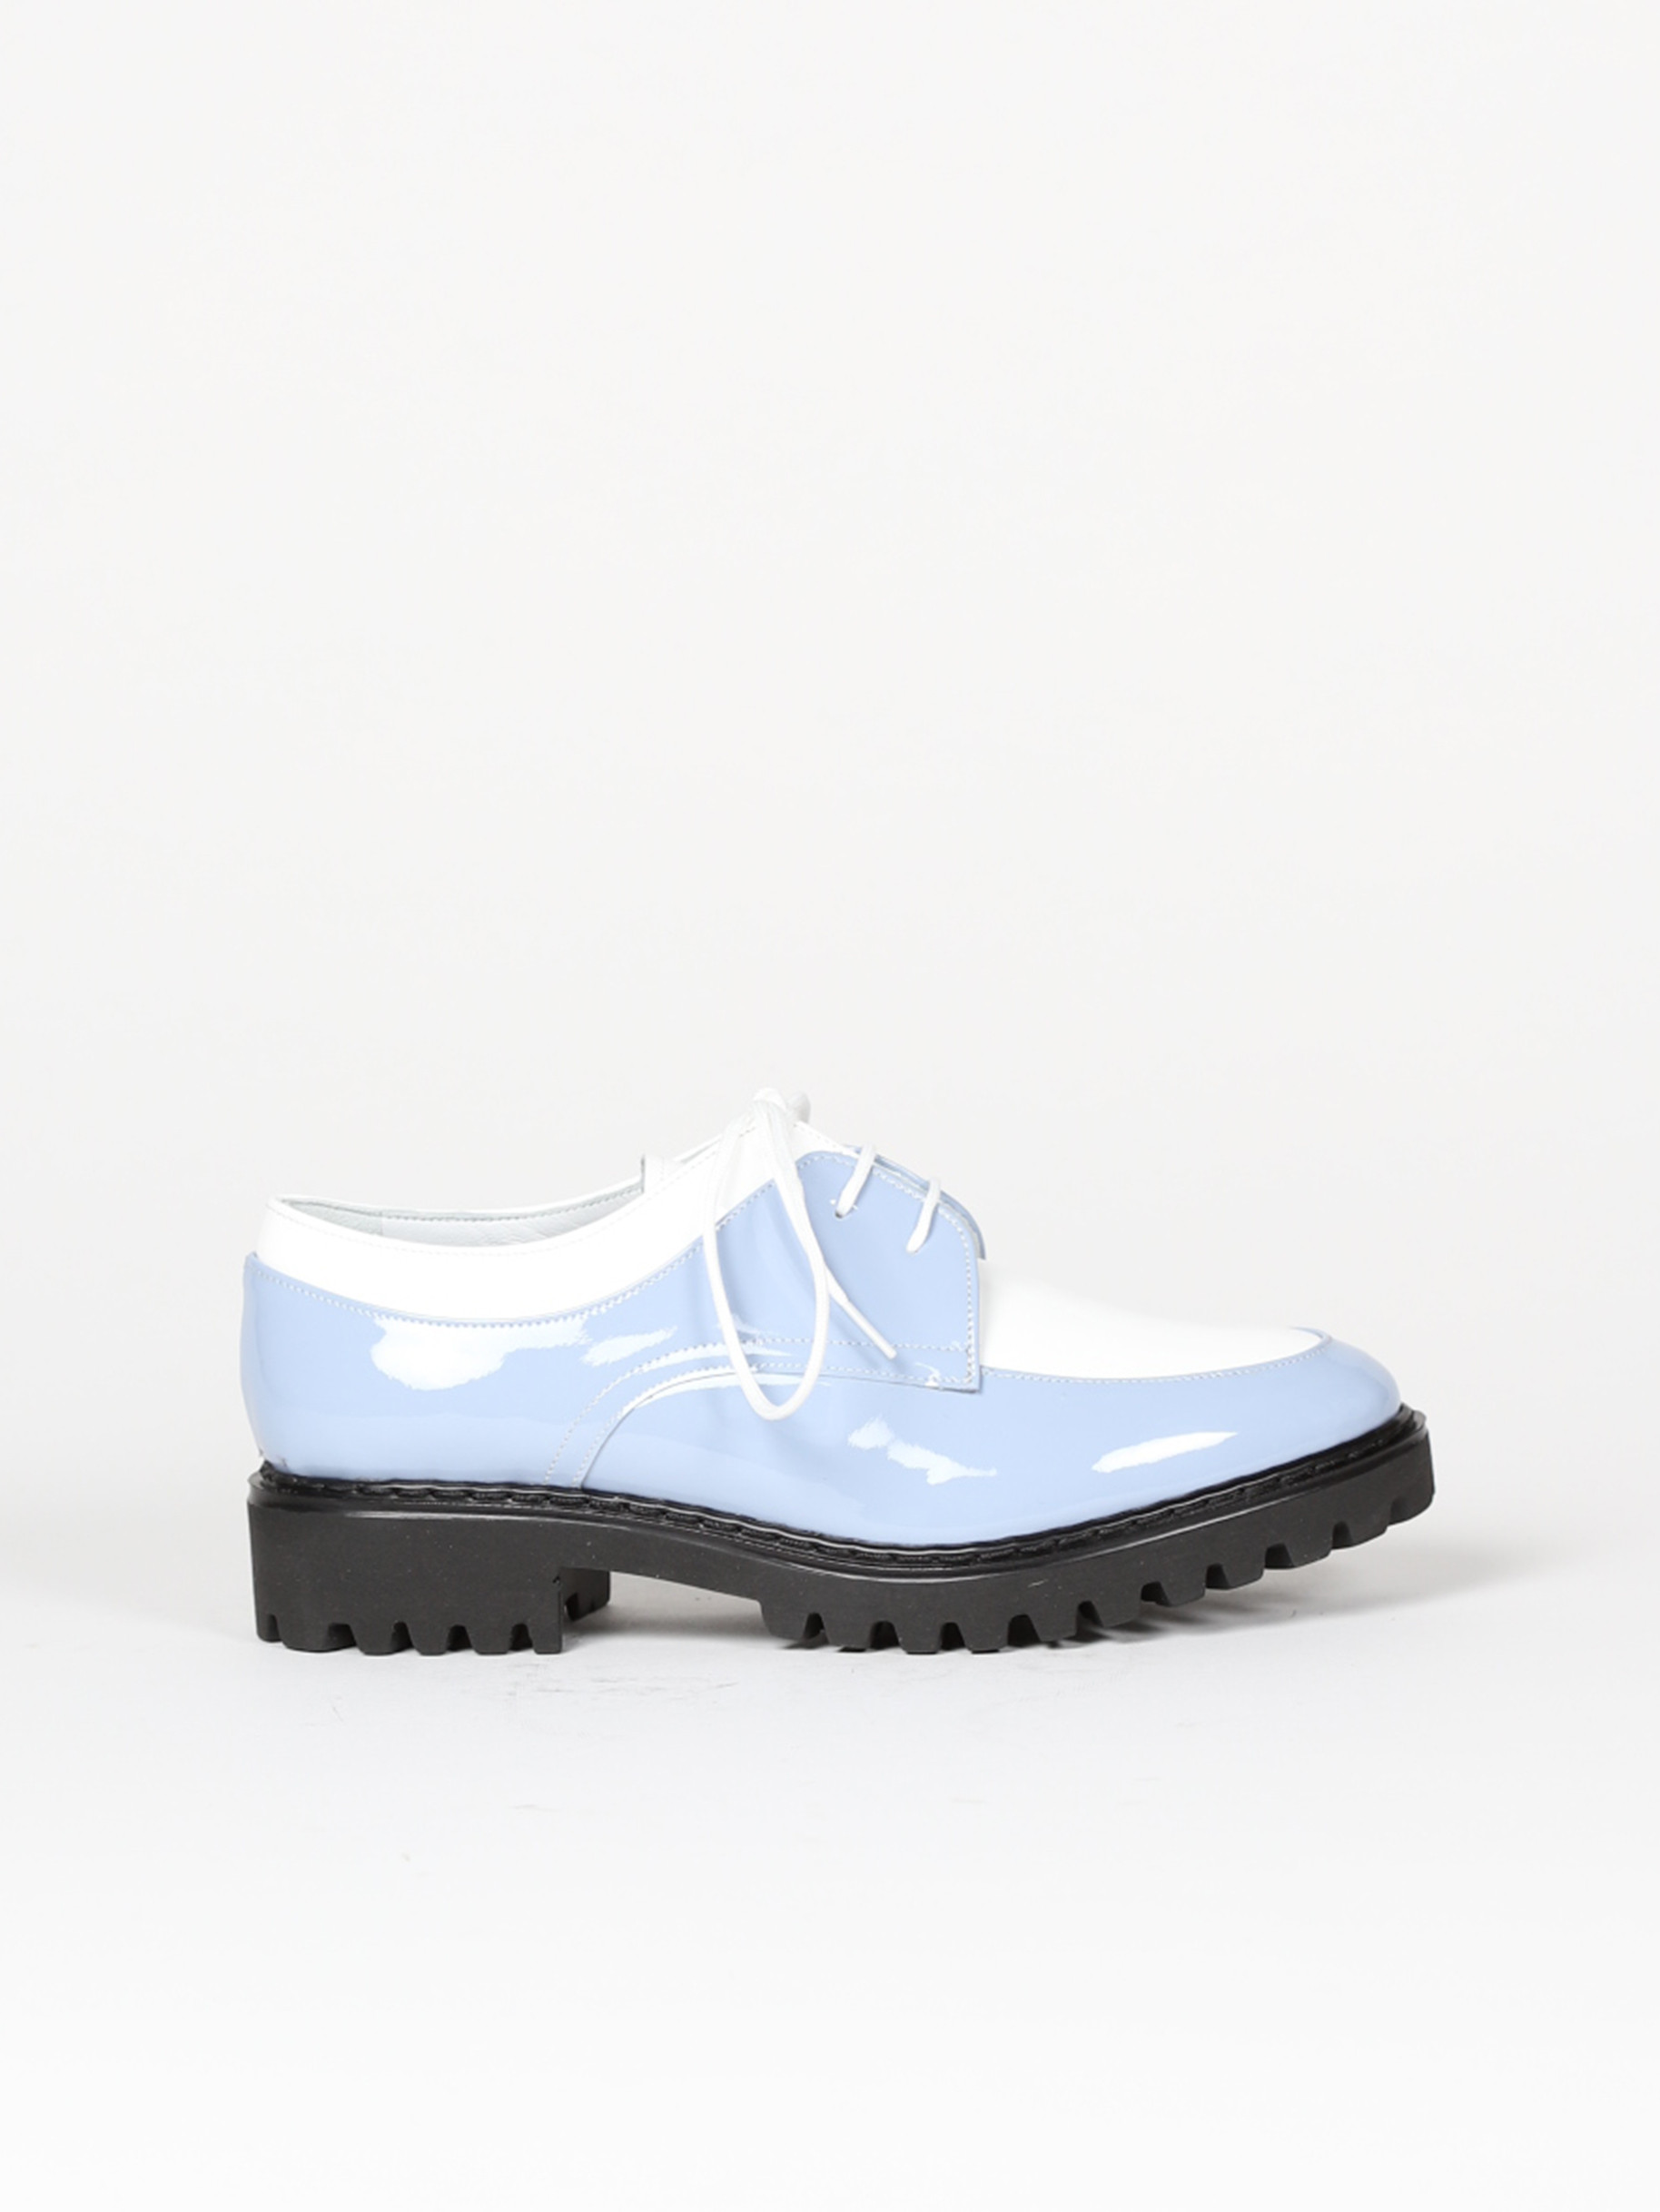 Skyblue and white leather derbies